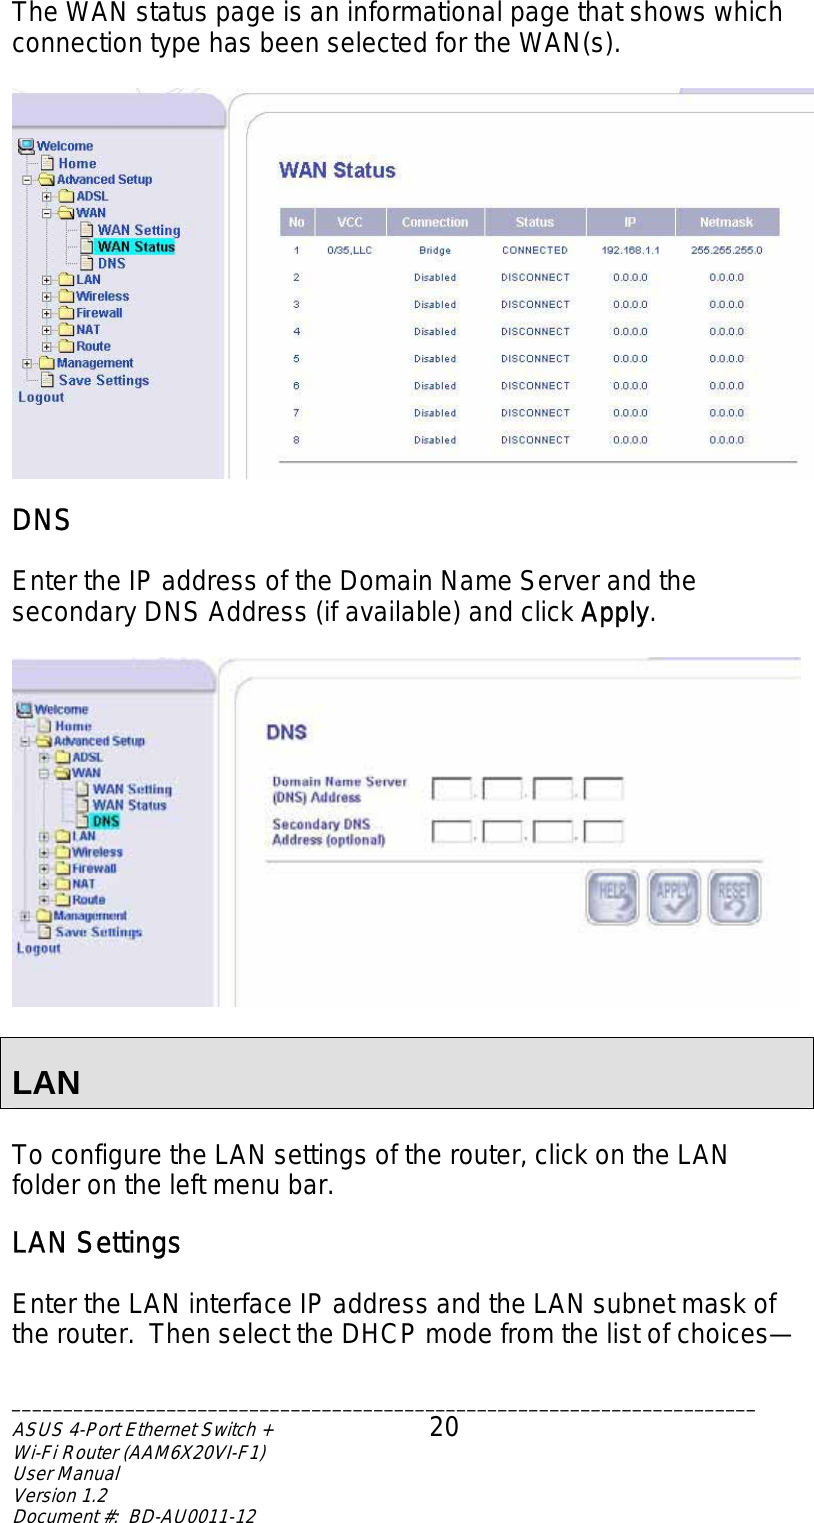 The WAN status page is an informational page that shows which connection type has been selected for the WAN(s).   DNS  Enter the IP address of the Domain Name Server and the secondary DNS Address (if available) and click Apply.    LAN  To configure the LAN settings of the router, click on the LAN folder on the left menu bar.   LAN Settings  Enter the LAN interface IP address and the LAN subnet mask of the router.  Then select the DHCP mode from the list of choices—  ________________________________________________________________________ASUS 4-Port Ethernet Switch +  20 Wi-Fi Router (AAM6X20VI-F1) User Manual                                                                         Version 1.2 Document #:  BD-AU0011-12  